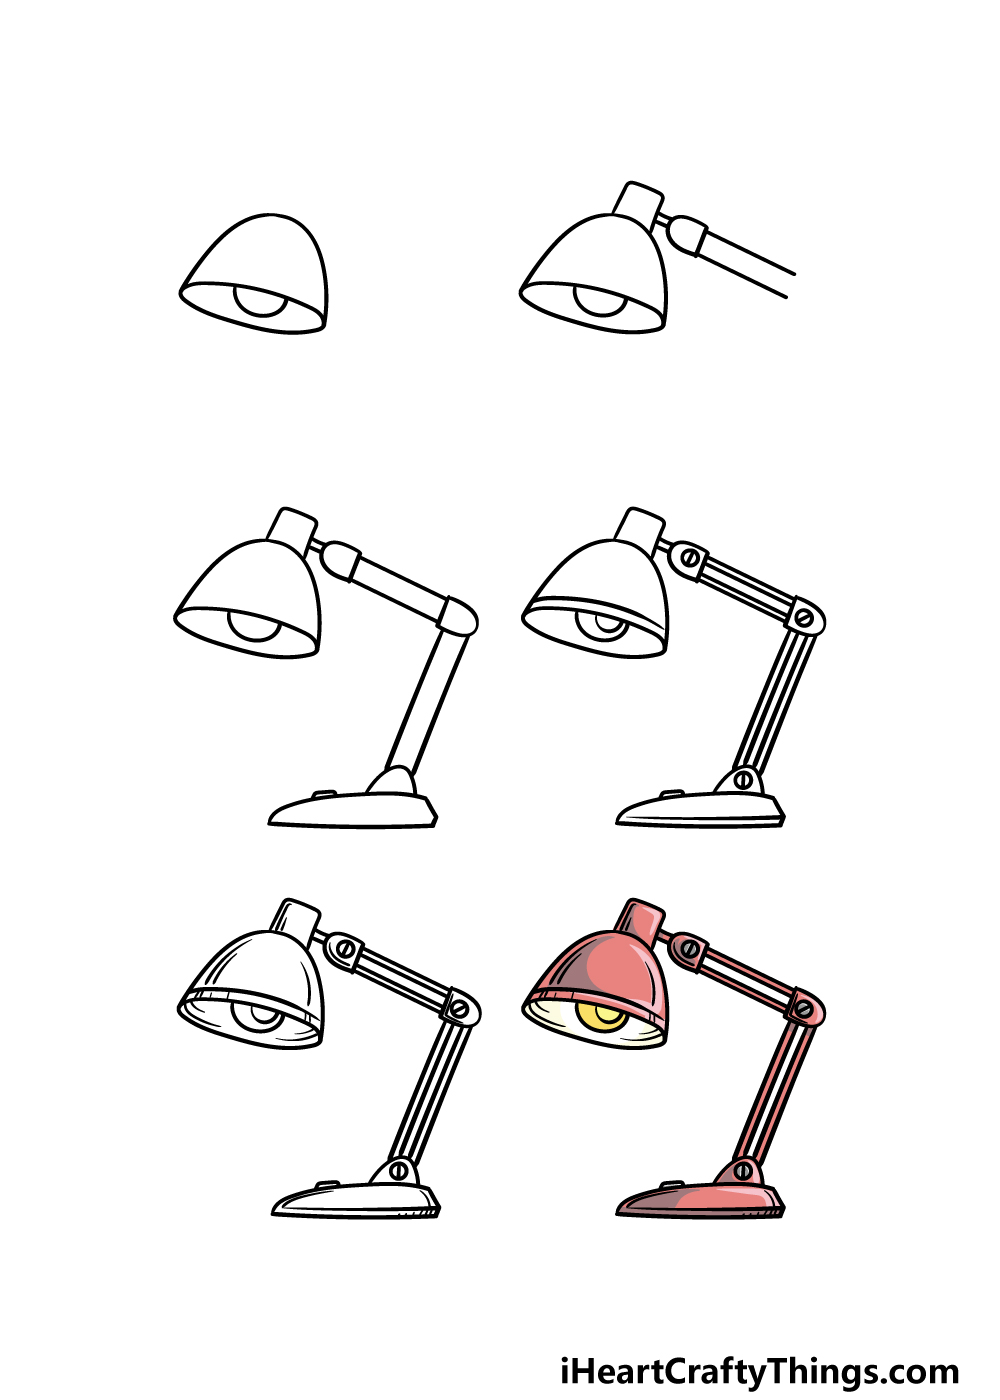 how to draw a lamp in 6 steps